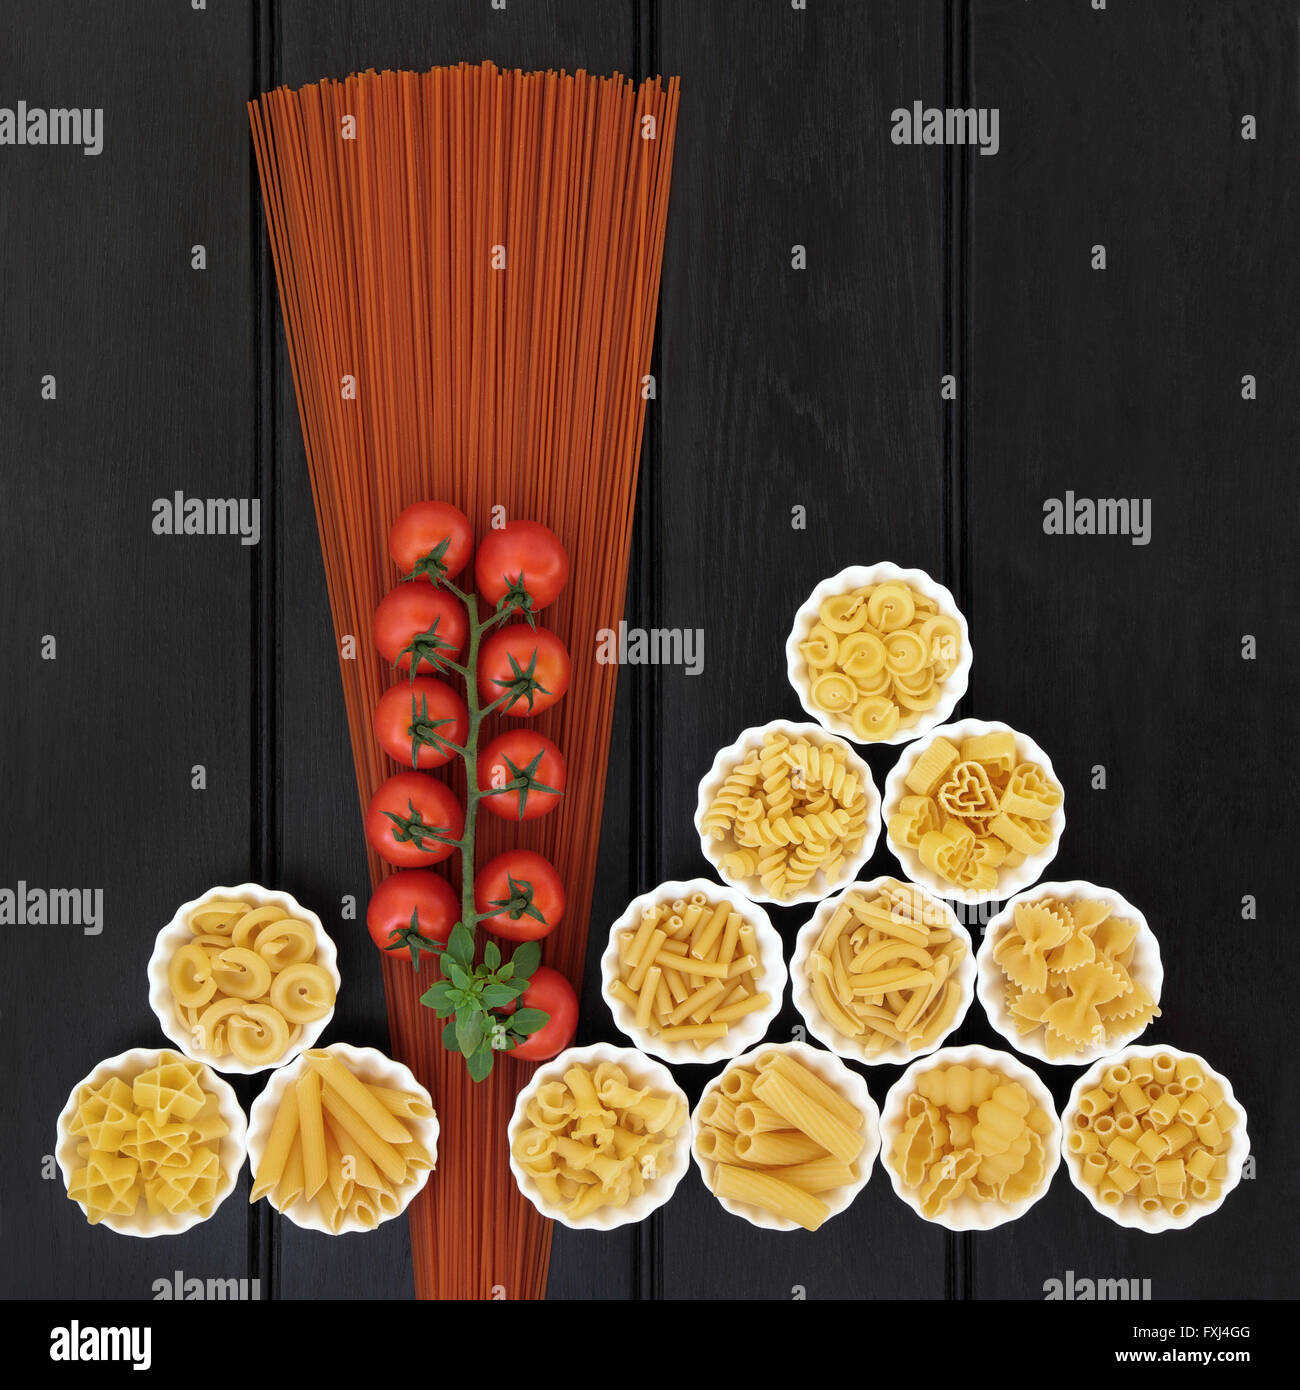 Tomato  spaghetti and italian pasta dried food selection in porcelain crinkle bowls over dark wood  background. Stock Photo